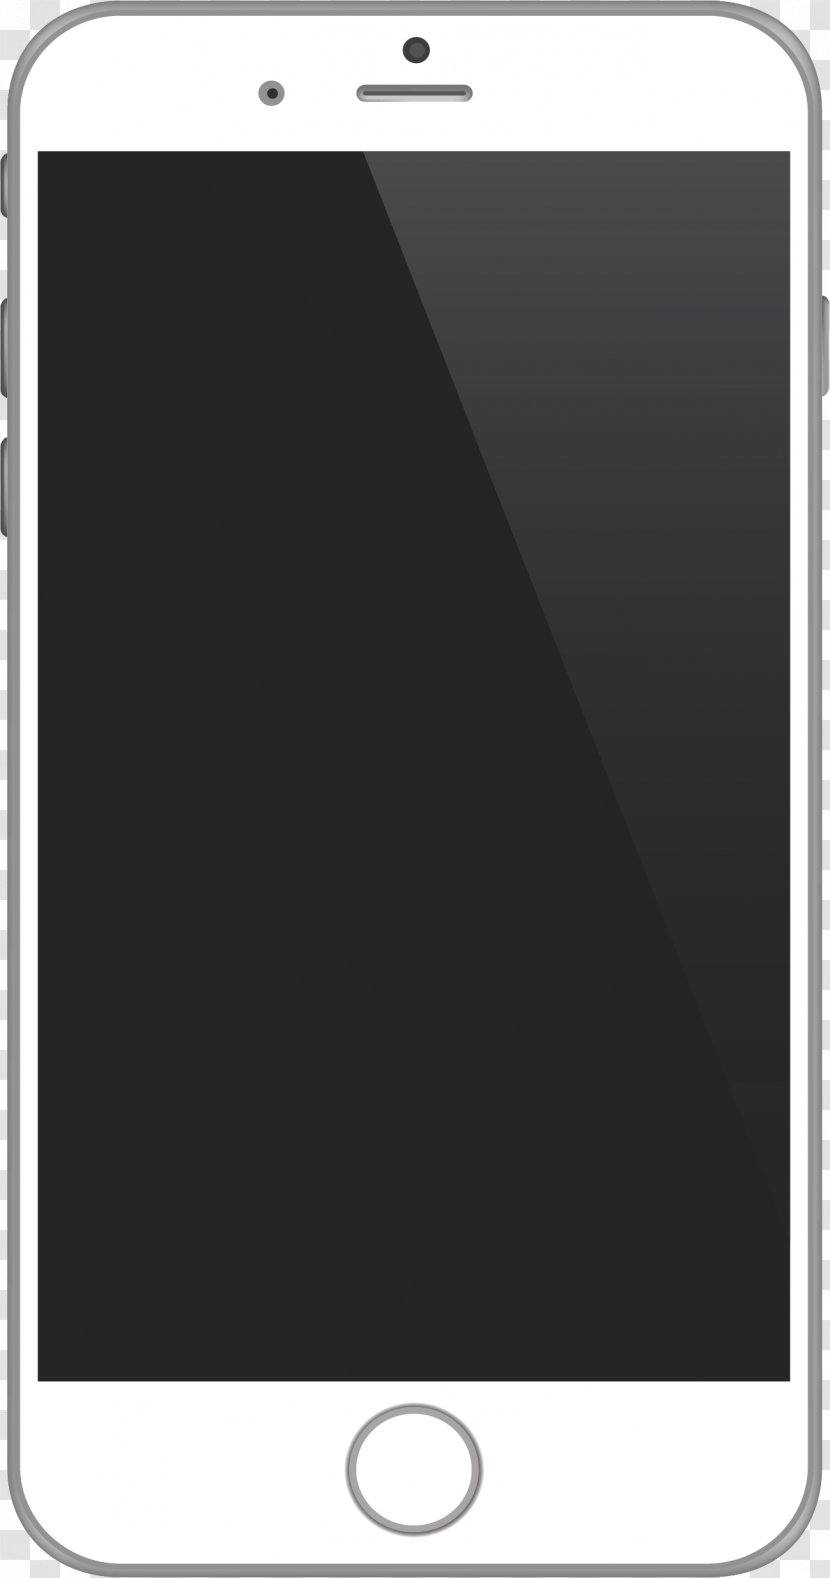 Samsung Galaxy S4 Mini Note II A5 (2017) Android - White Phone Model Transparent PNG